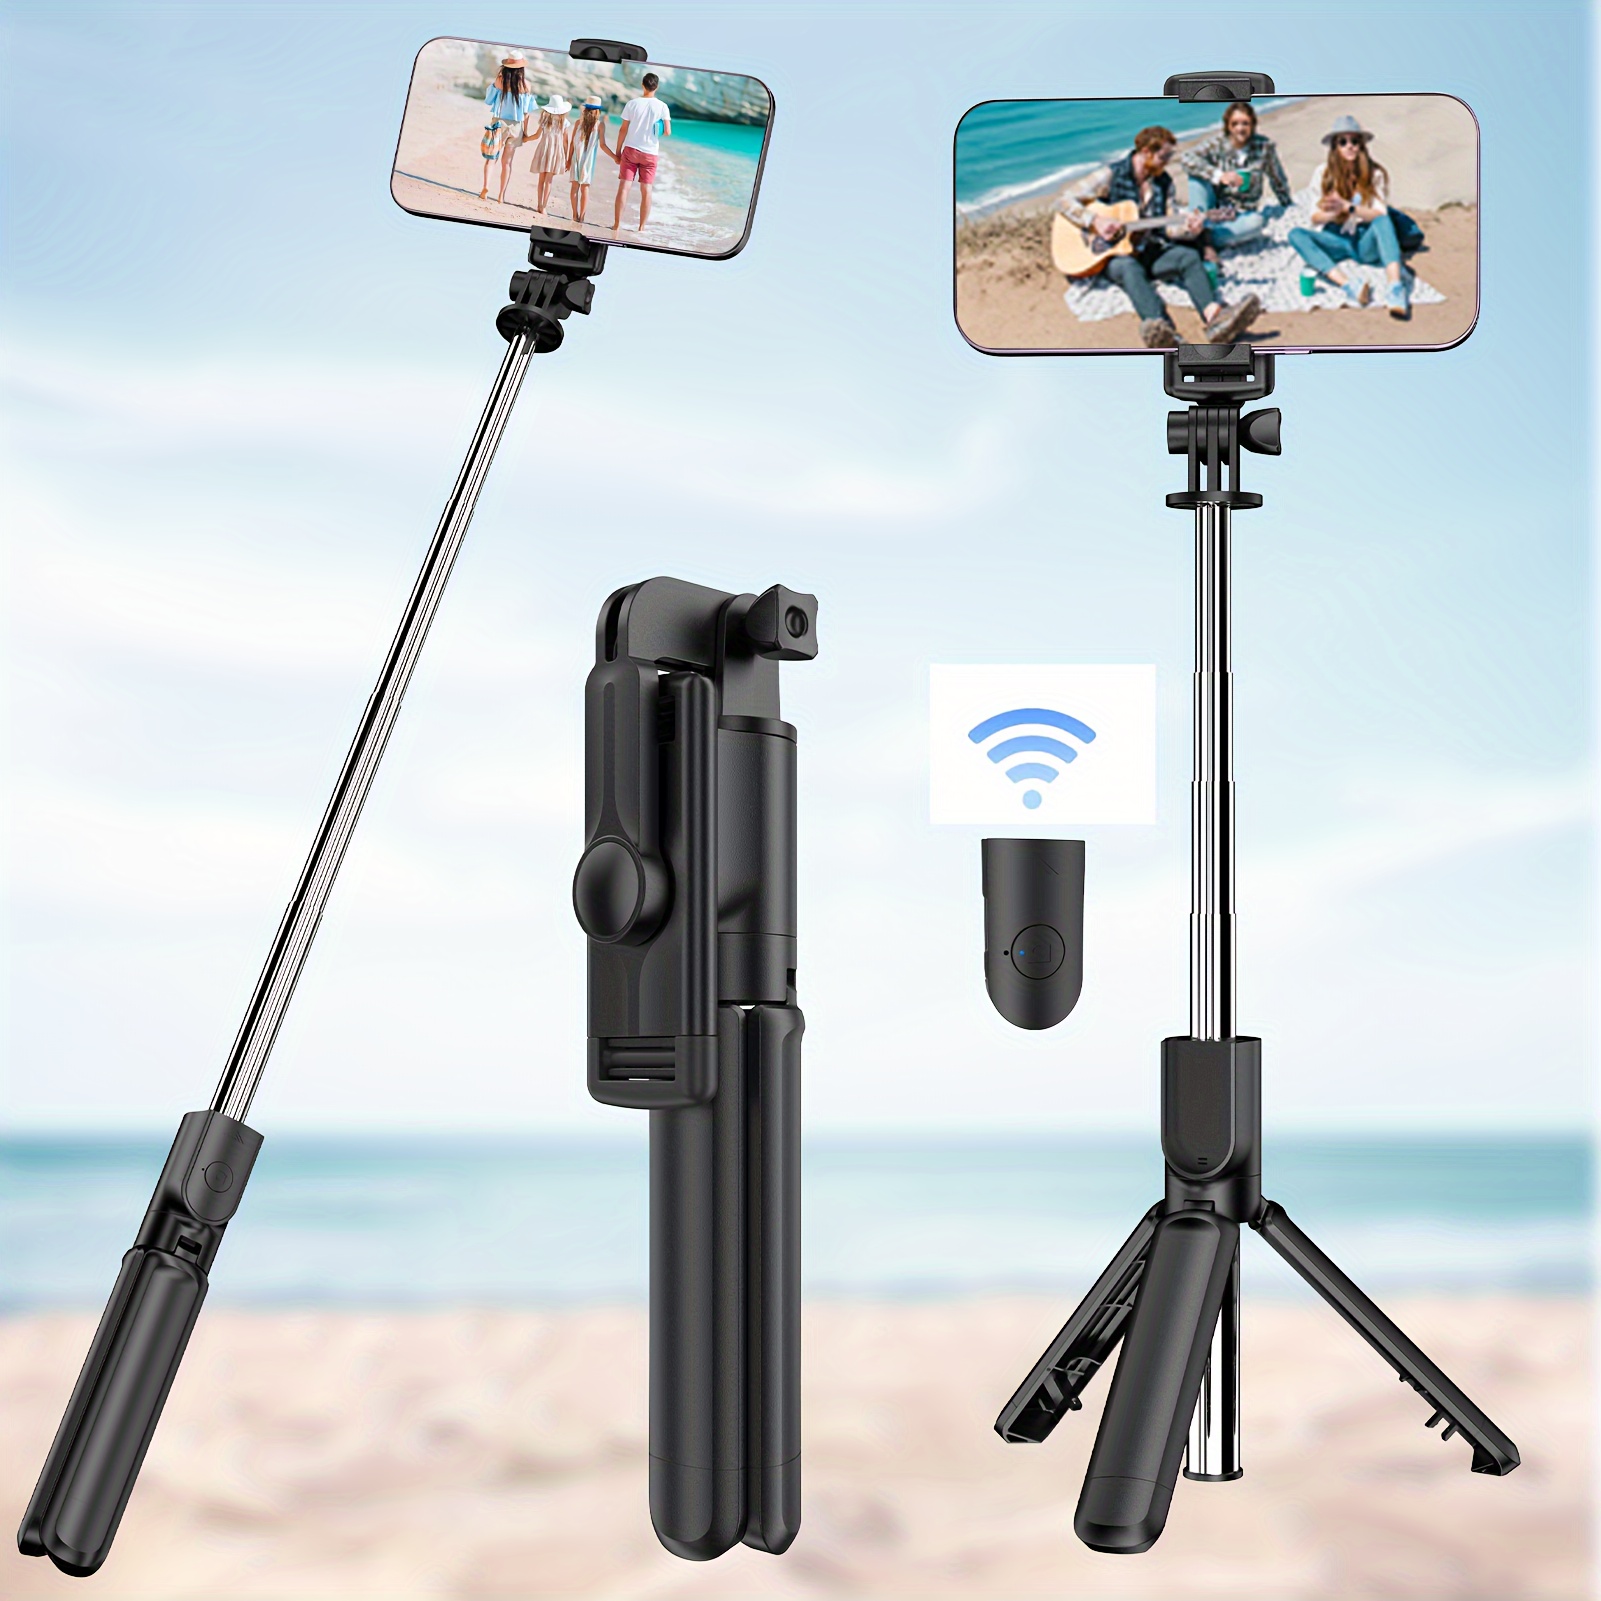 

Selfie Stick Tripod With Remote Wireless Buetooth For Iphone 14 13 12 Pro Max/ios, Portable Extendable Selfie Stick Phone Holder With Wireless Remote Shutter For Android/samsung Galaxy S22